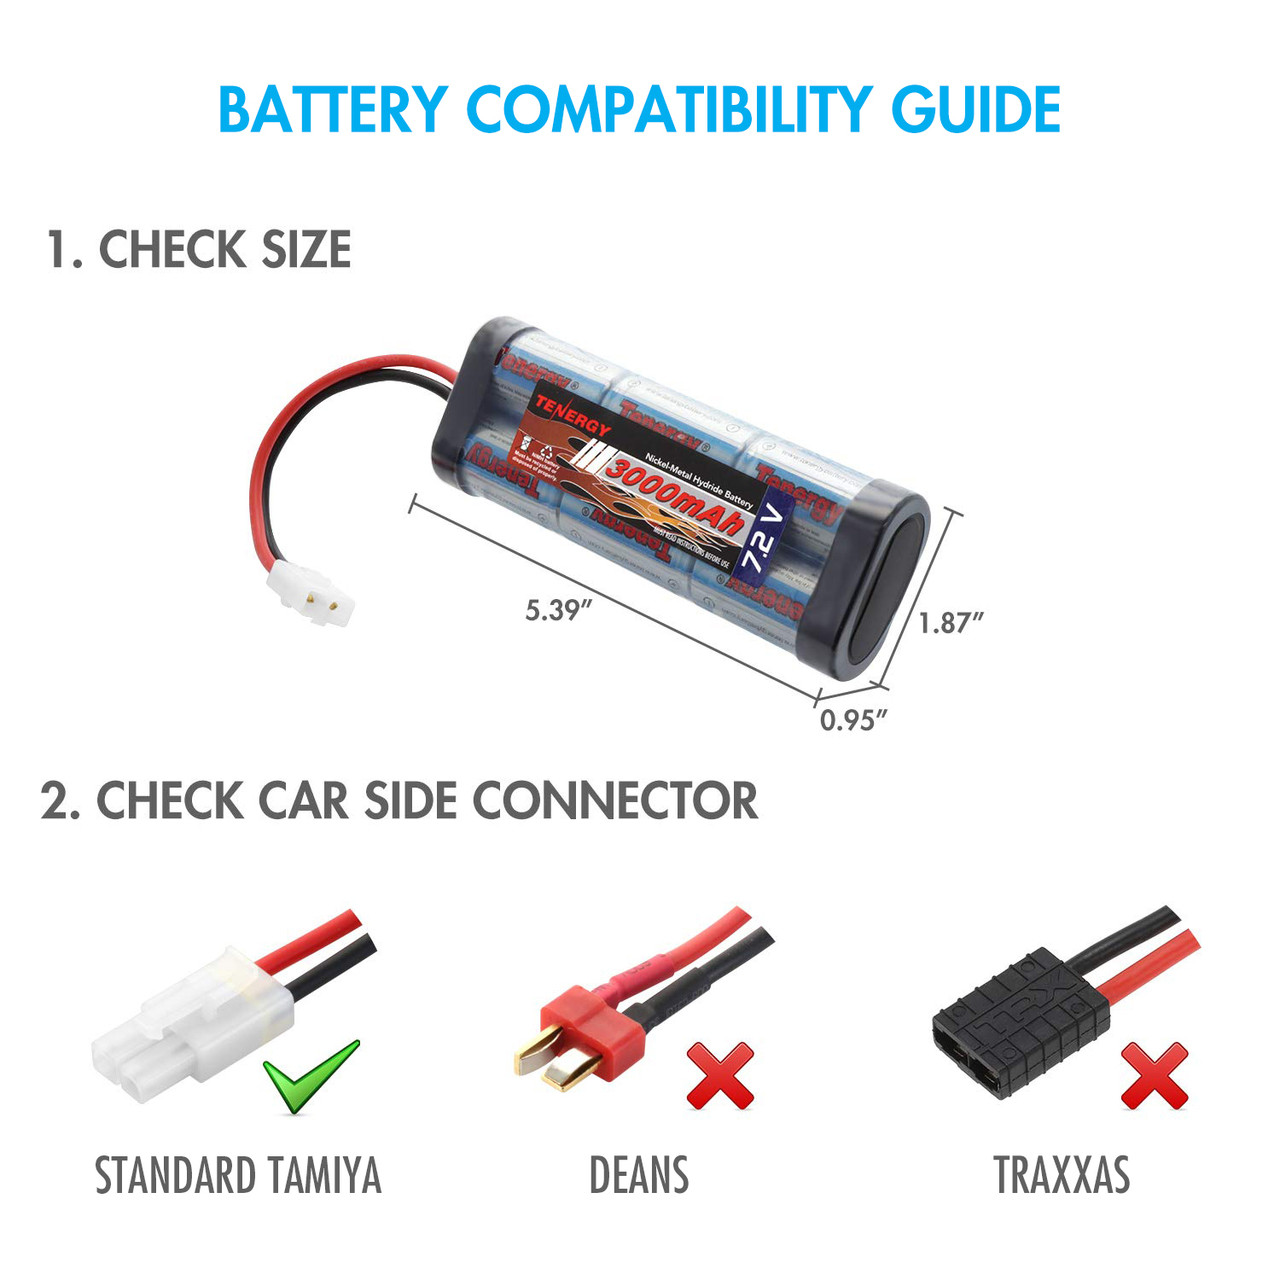 Combo: Tenergy NiMH 7.2V 3000mAh Battery Pack 2-pack Tamiya Connector, for RC Cars